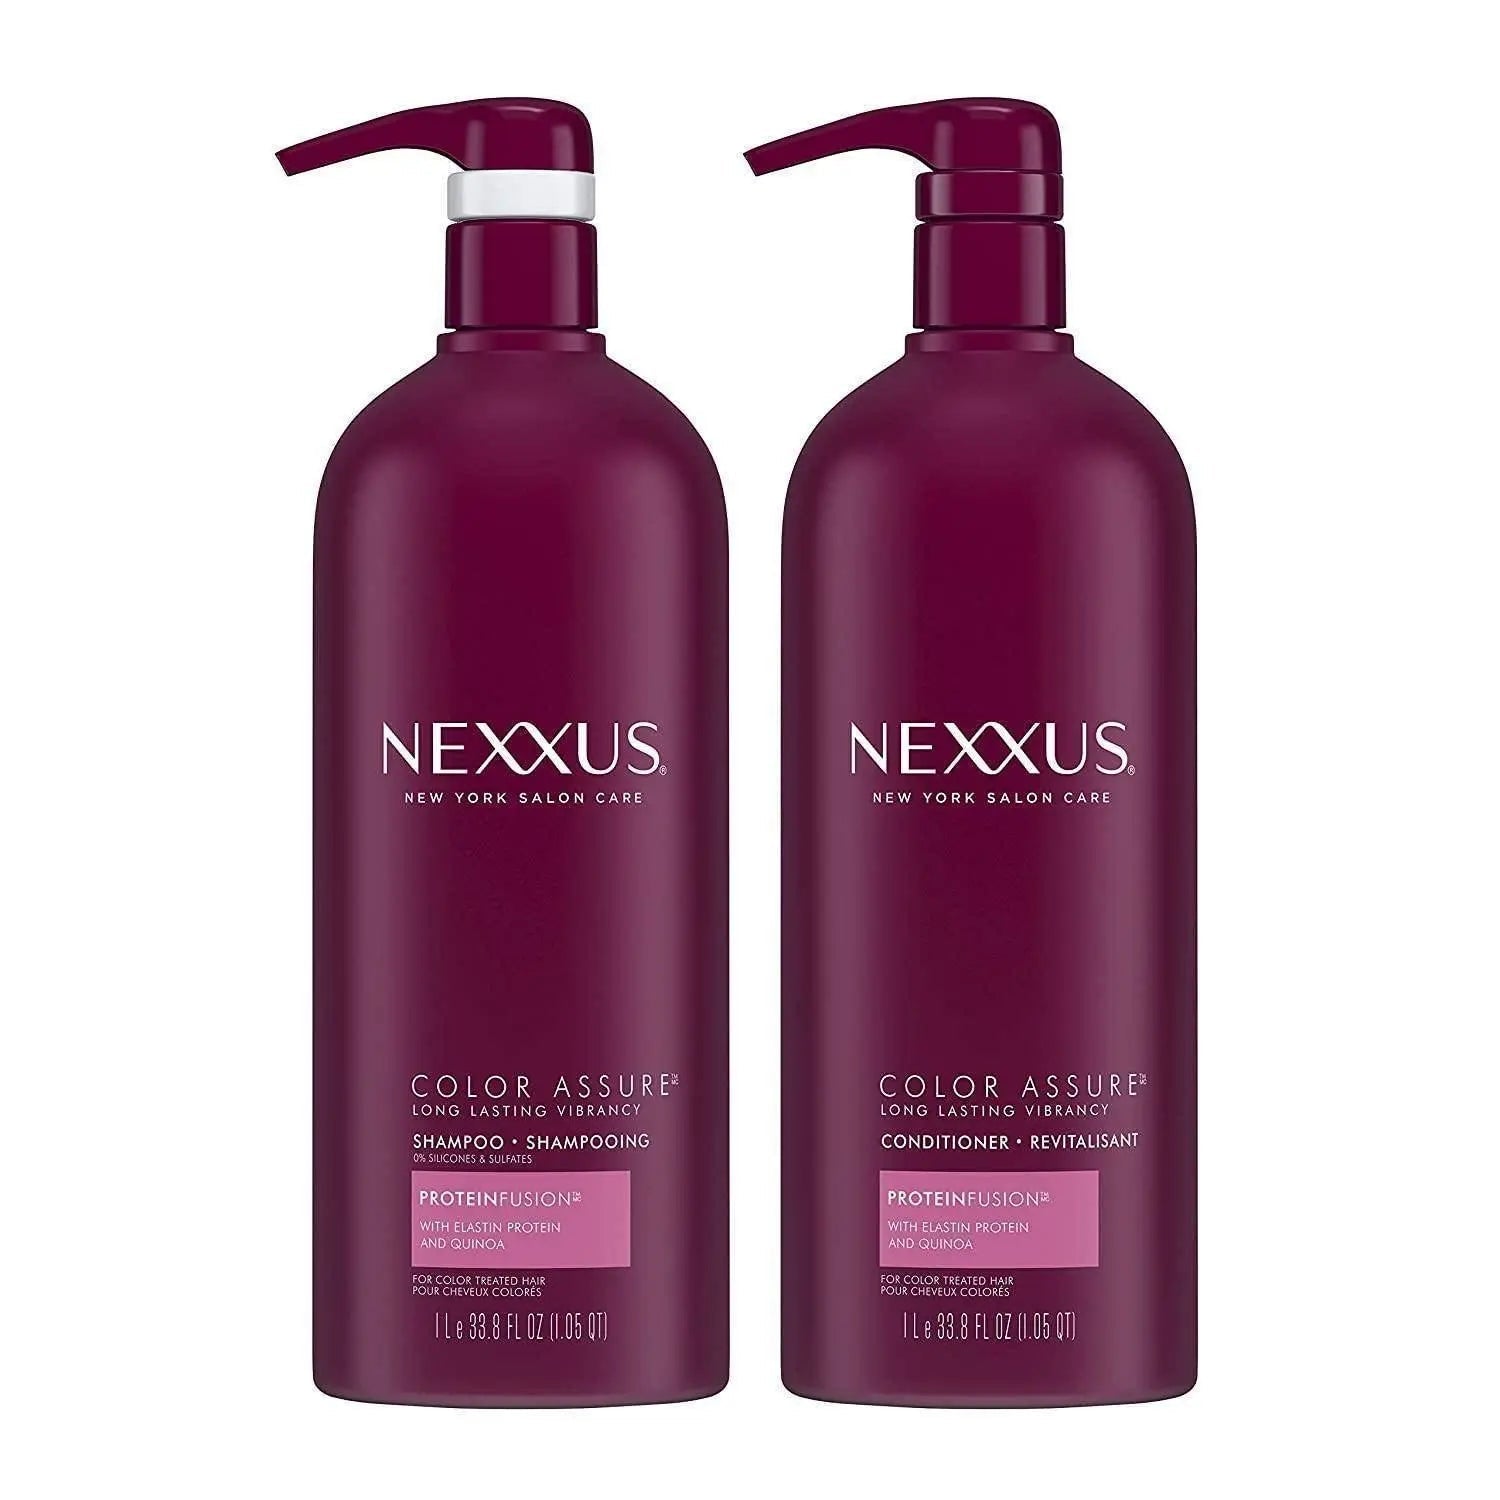 Wholesale prices with free shipping all over United States Nexxus Color Assure Shampoo and Conditioner - Steven Deals